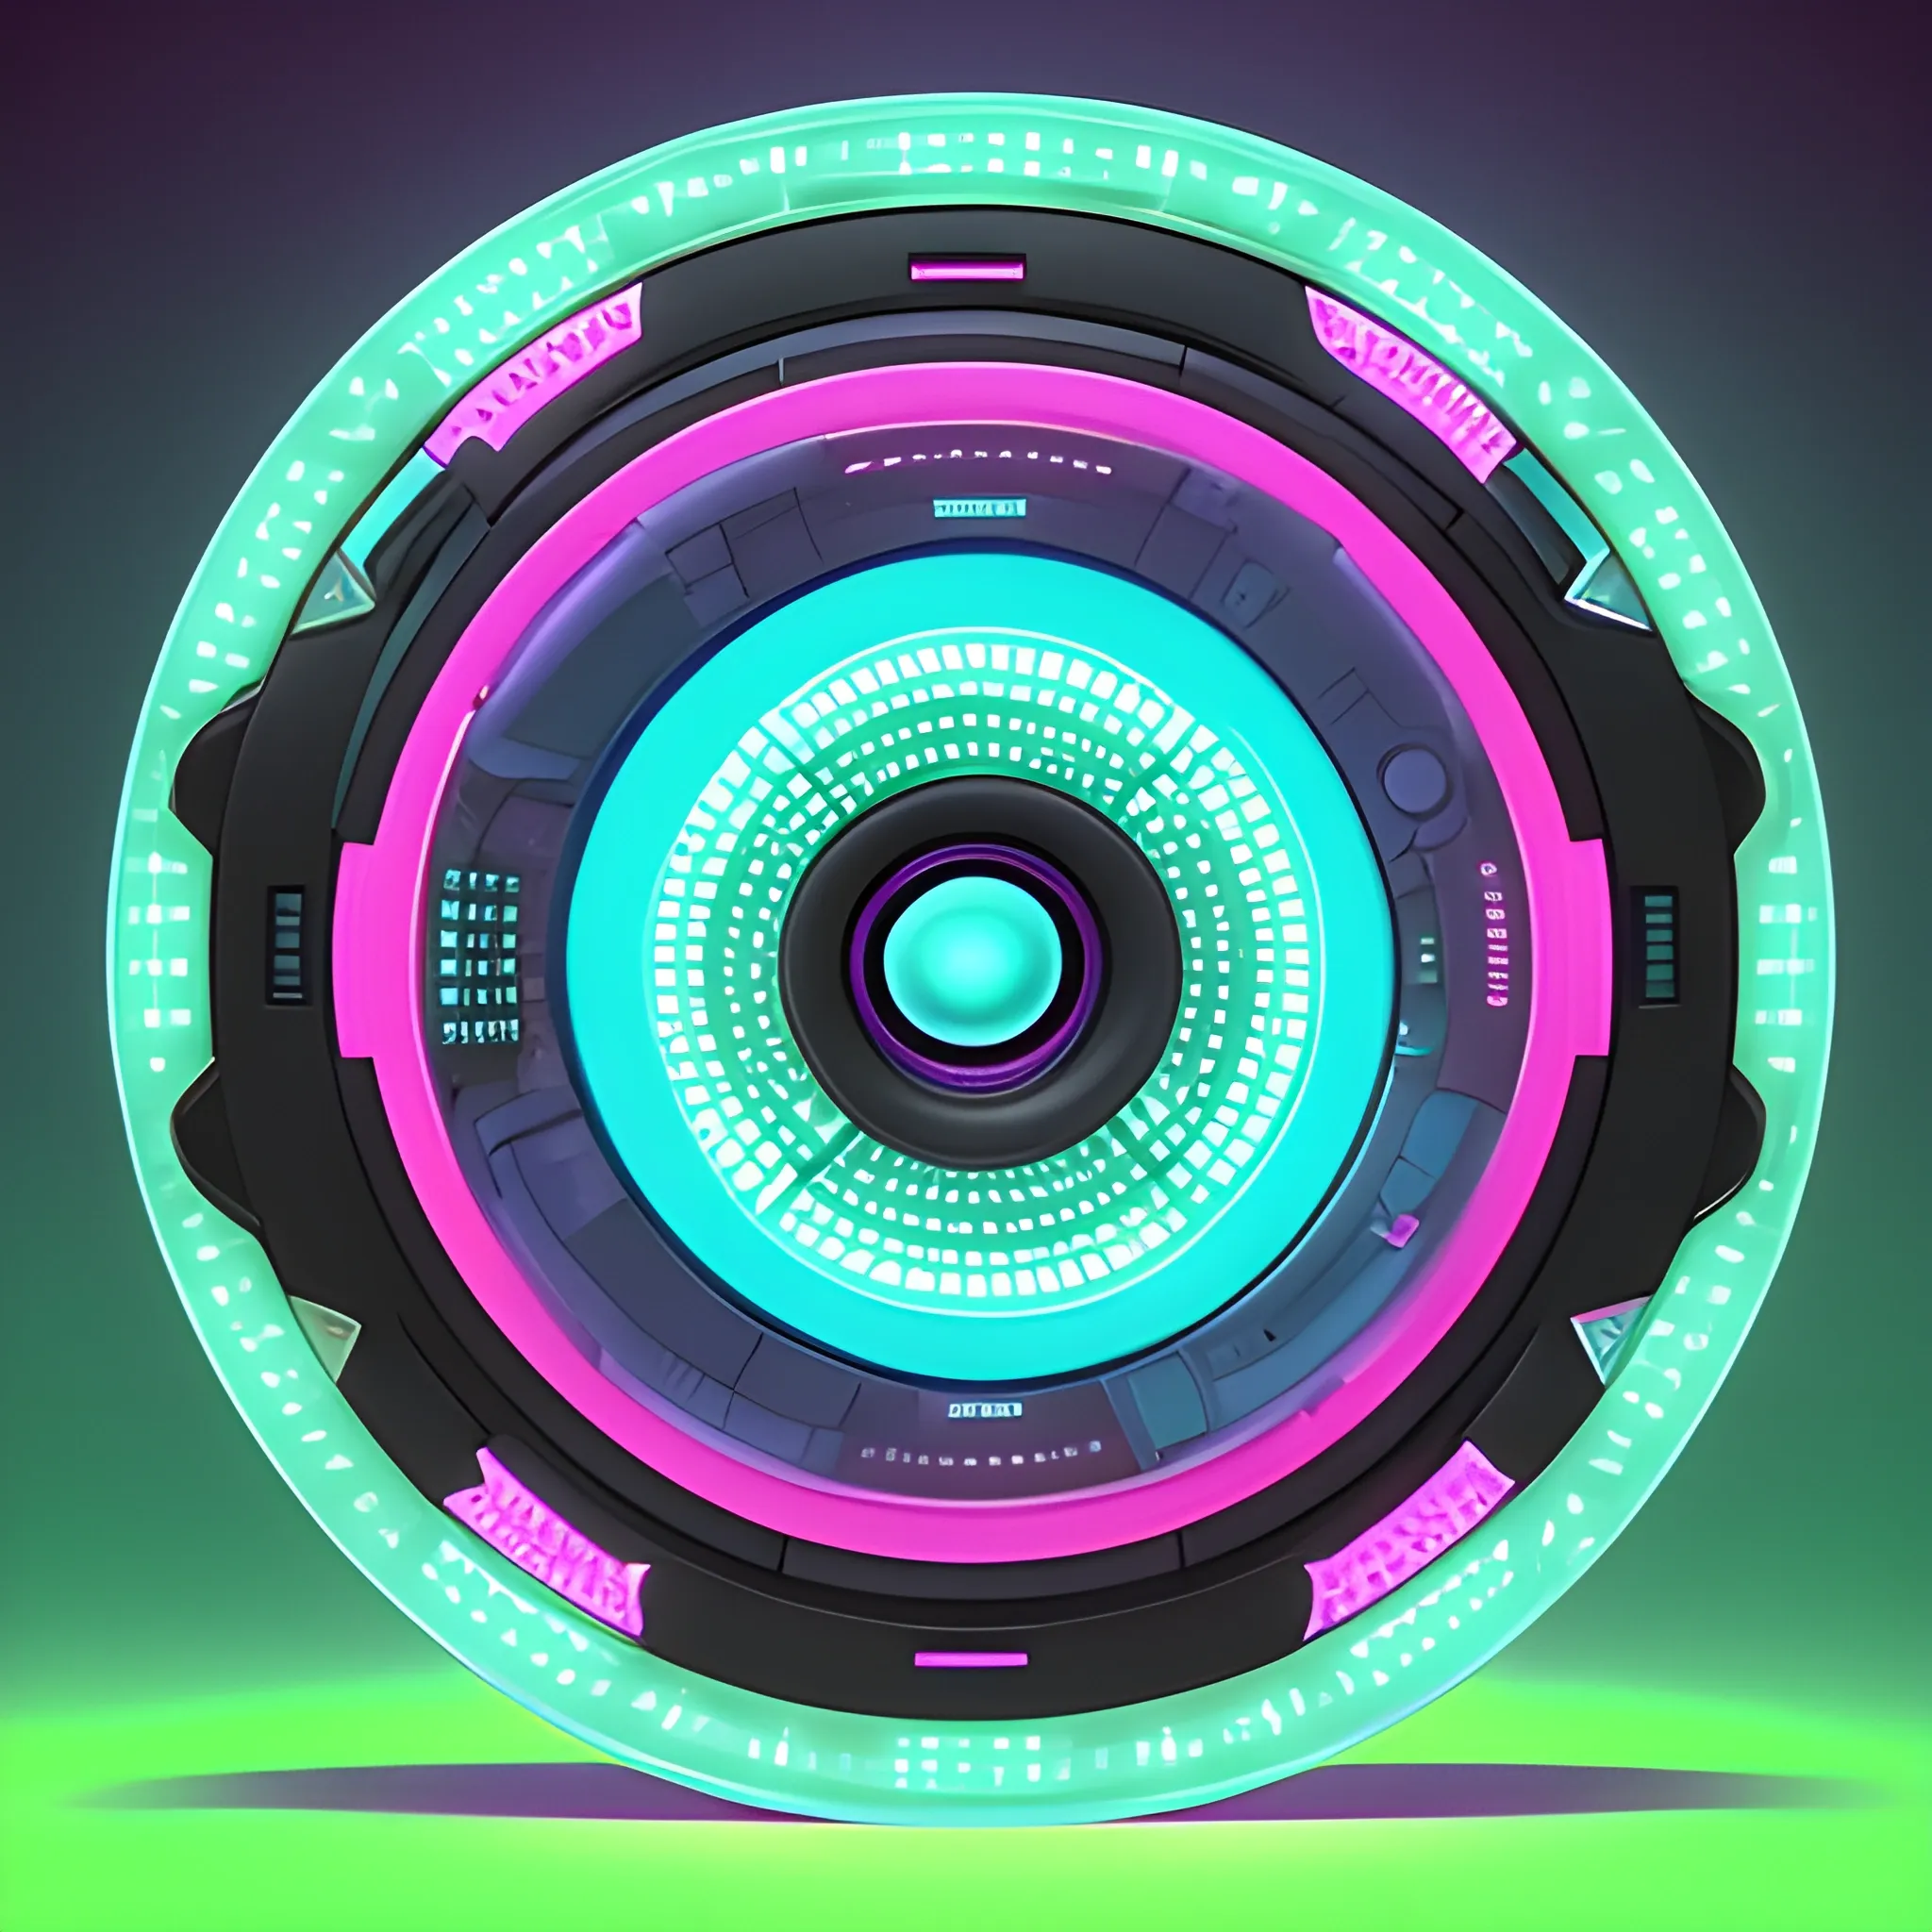 3D, Sci-Fi, Hip-hop, Urban, pink and cyan colored, circular avatar. high-definition, realistic, intricate detailing, embossed circular subwoofer frame, black circle with led lights bleeding centered inside, transparent background